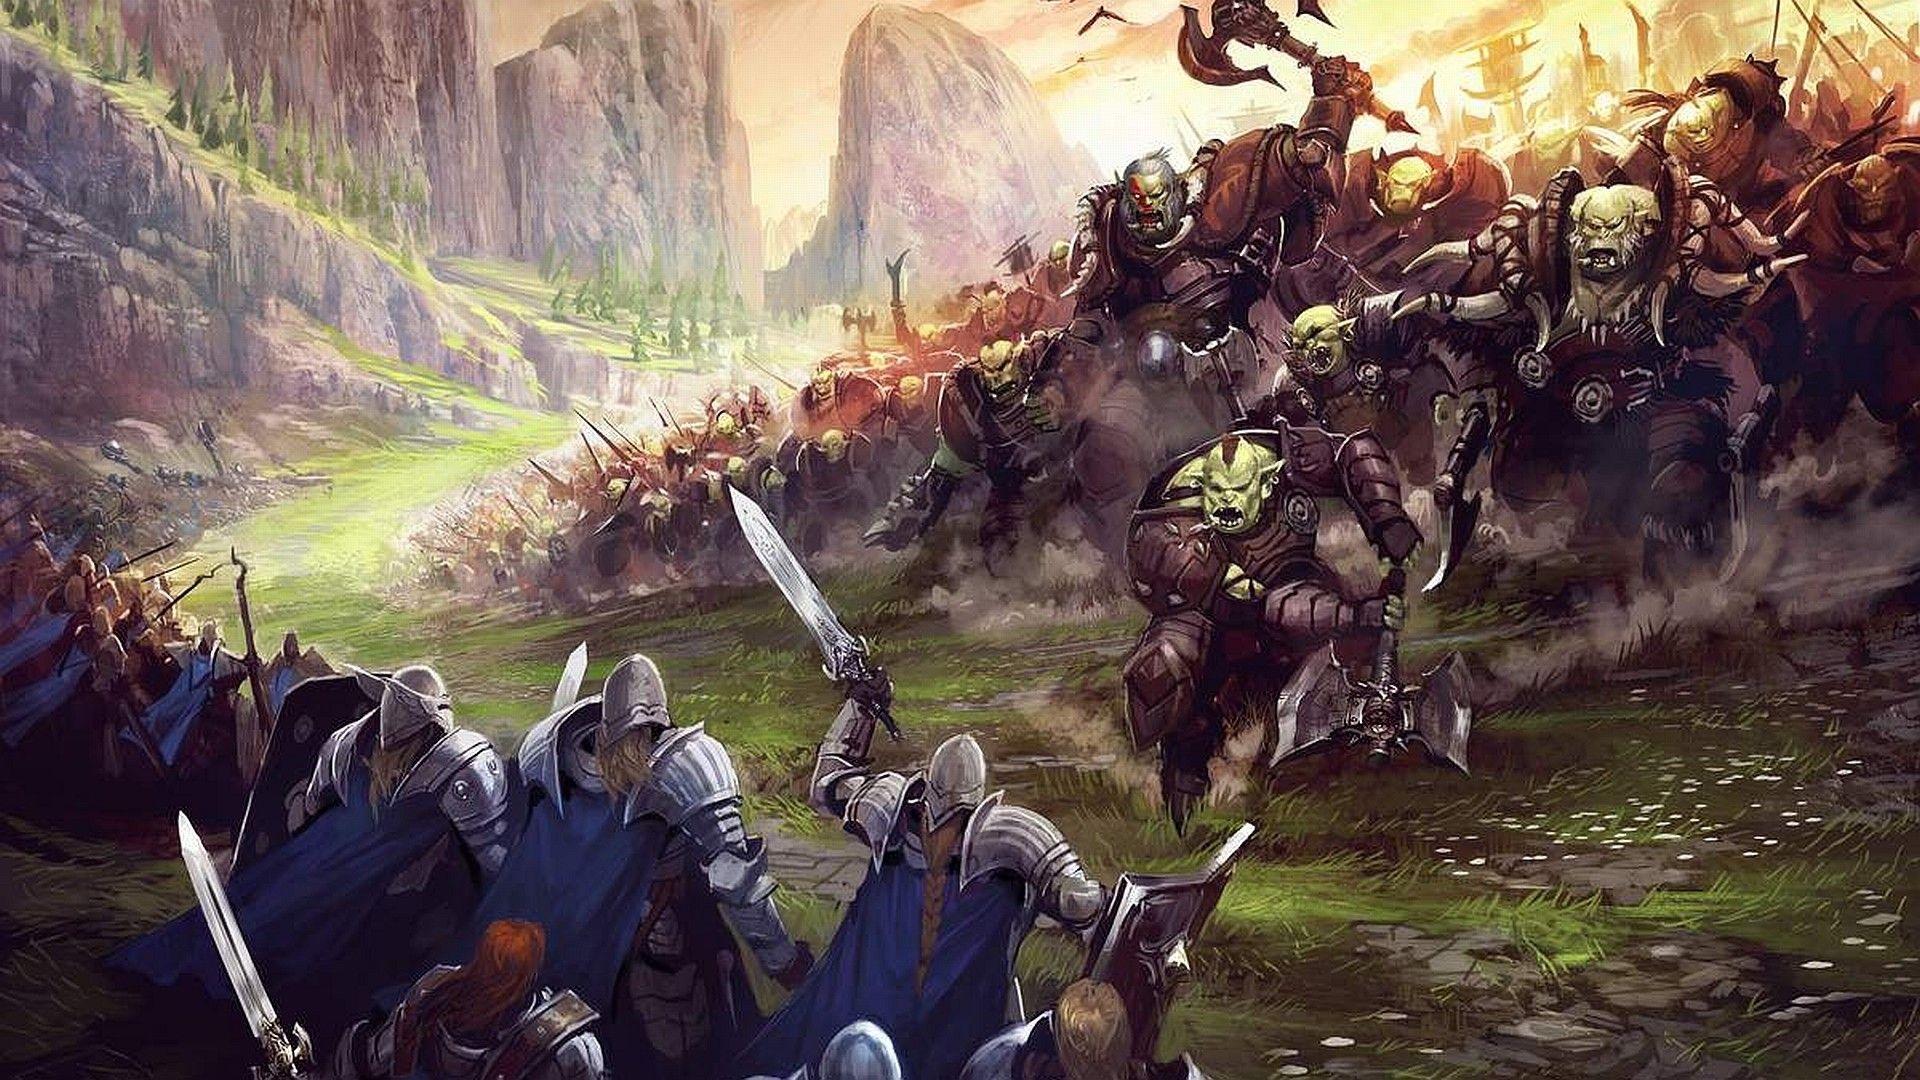 Medieval Battle Wallpapers - Top Free Medieval Battle Backgrounds